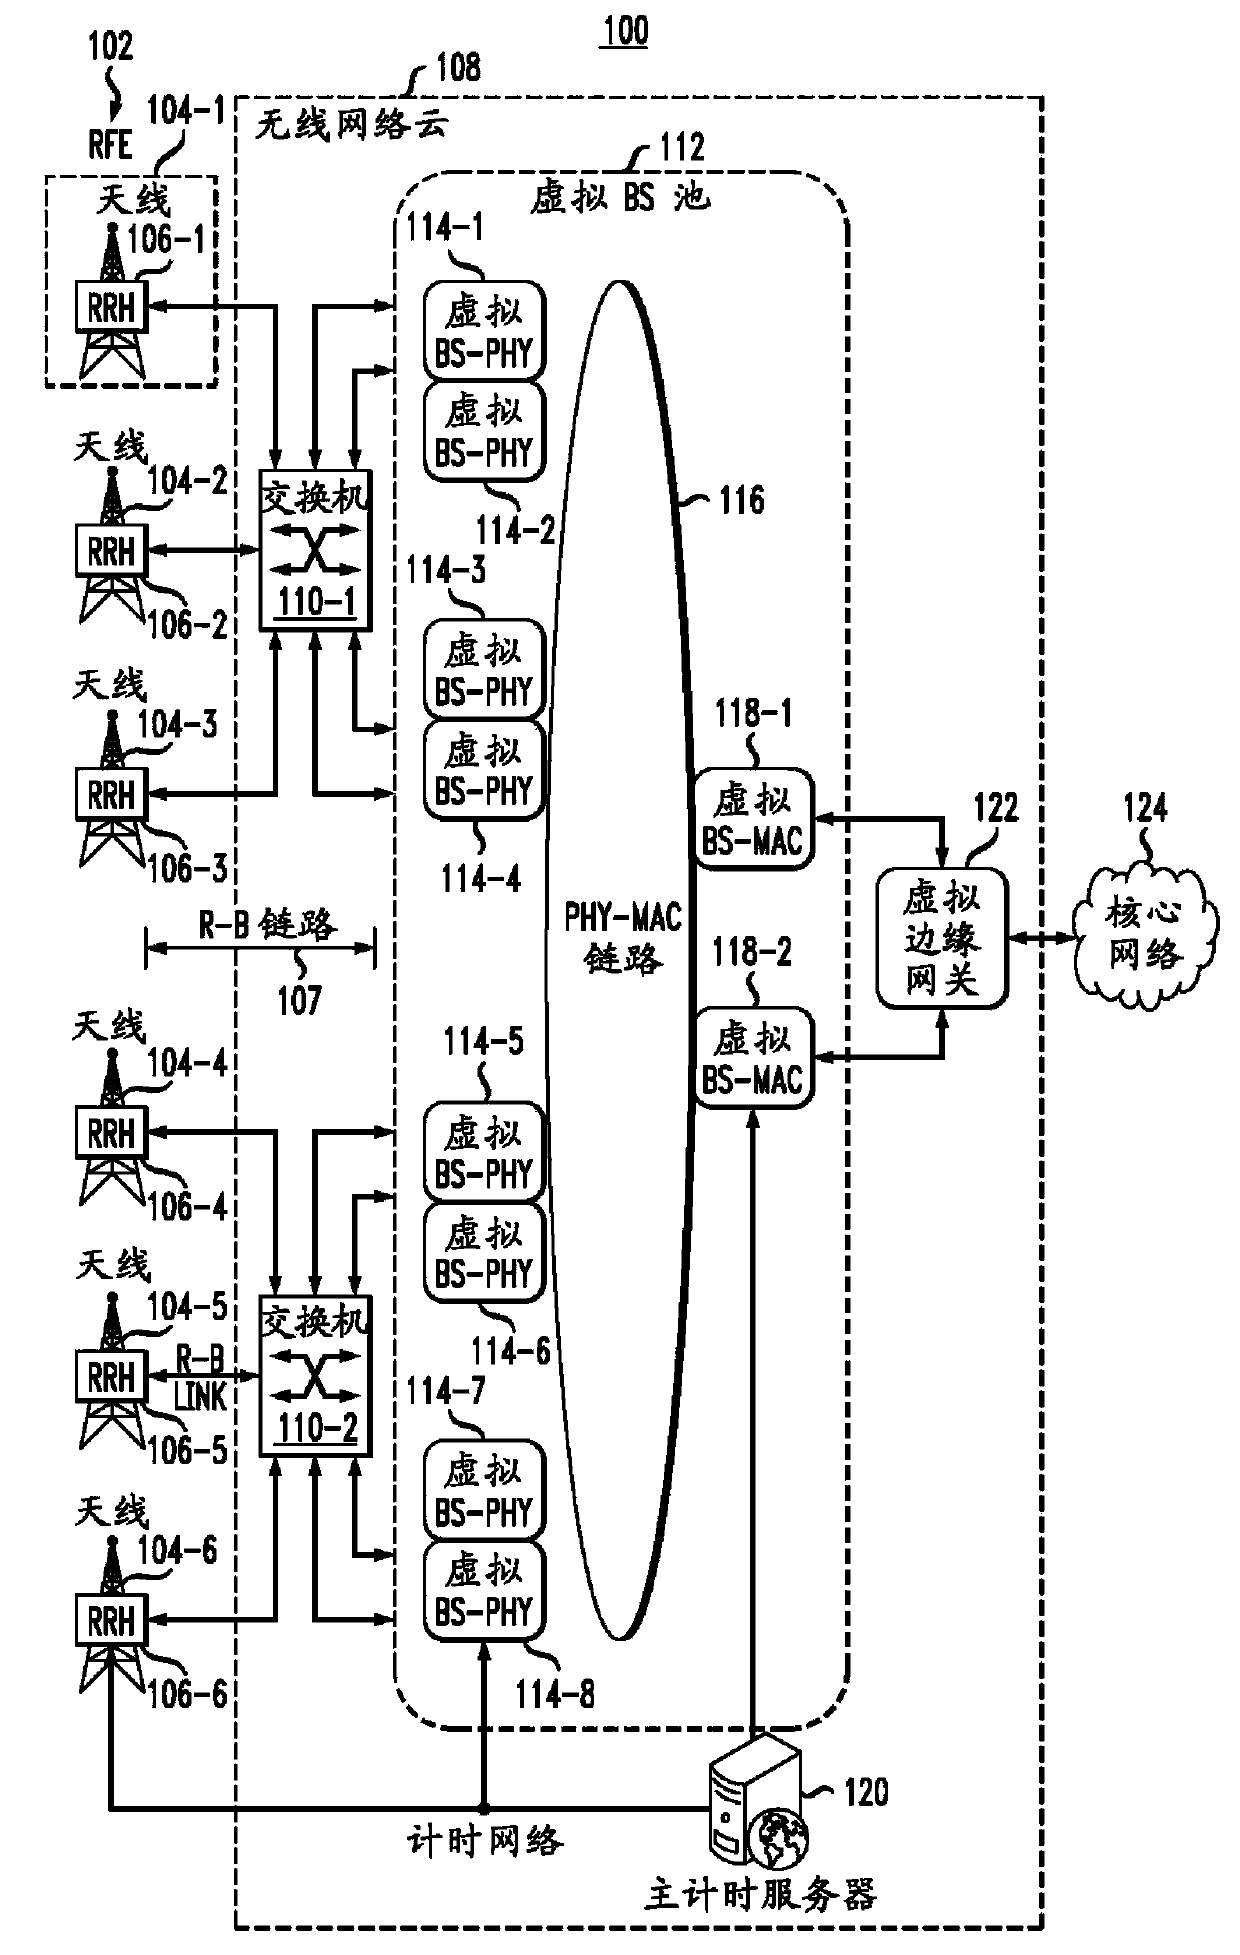 Method and device for configuring wireless network cloud system based on density estimation